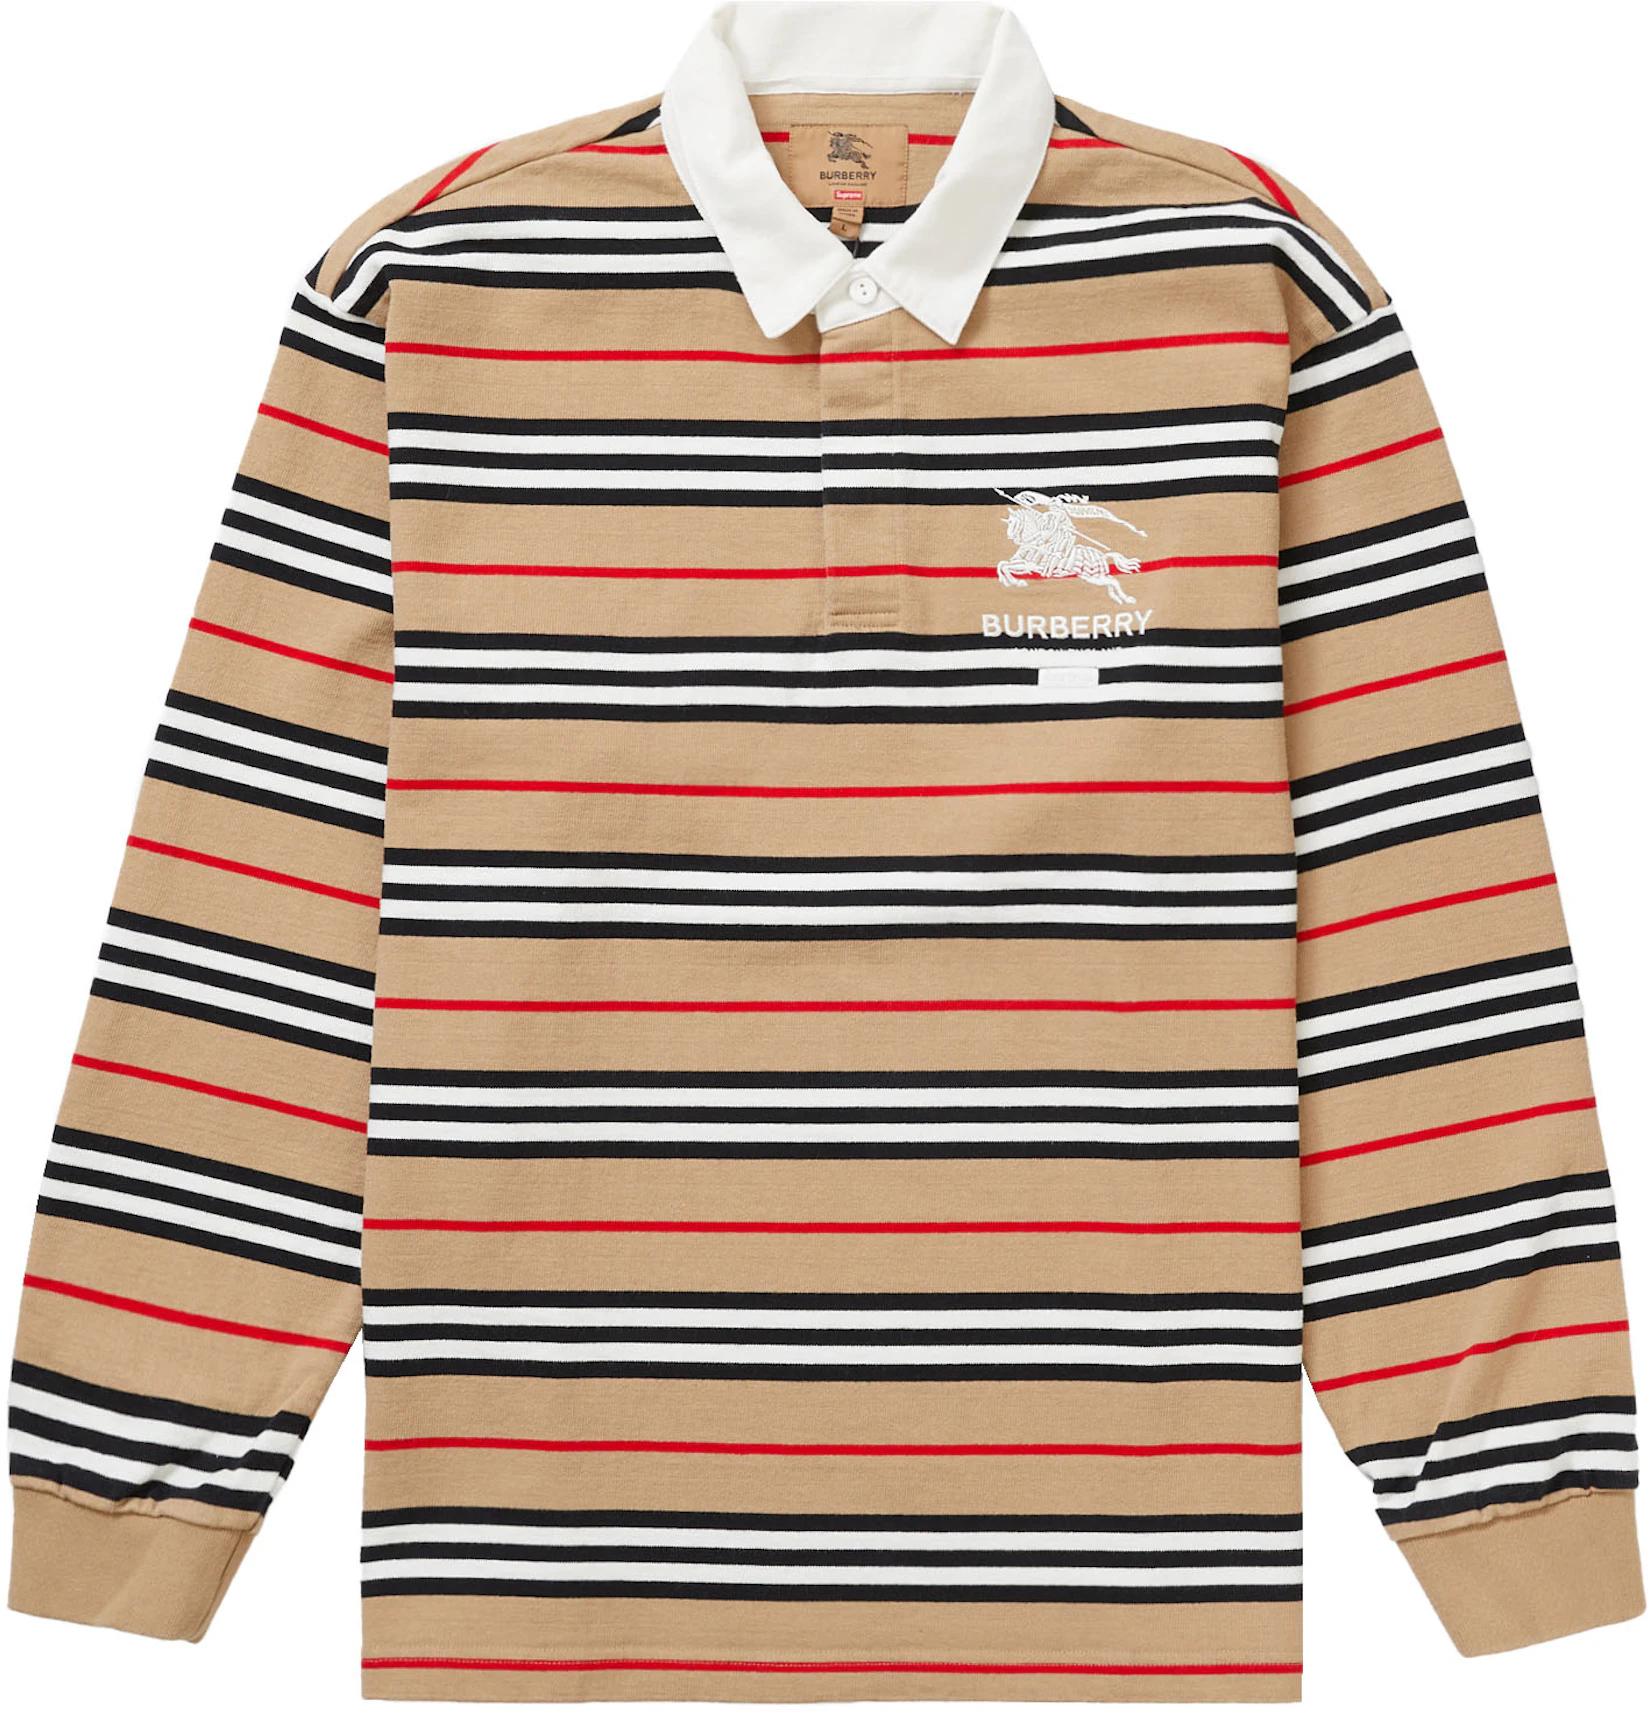 Top 44+ imagen supreme burberry rugby shirt